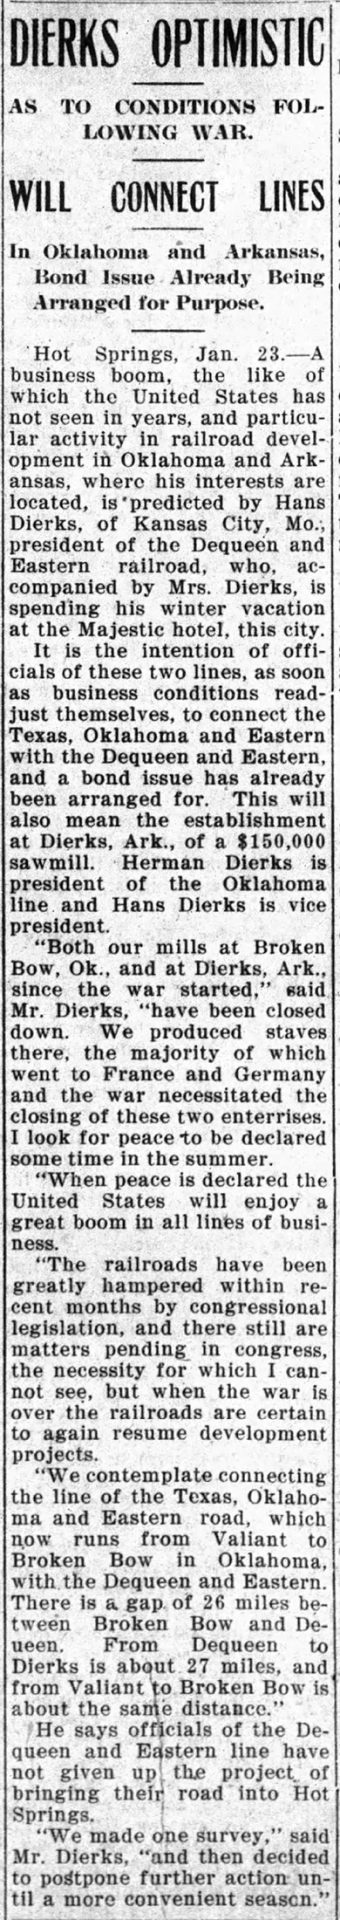 "Dierks optimistic" newspaper clipping